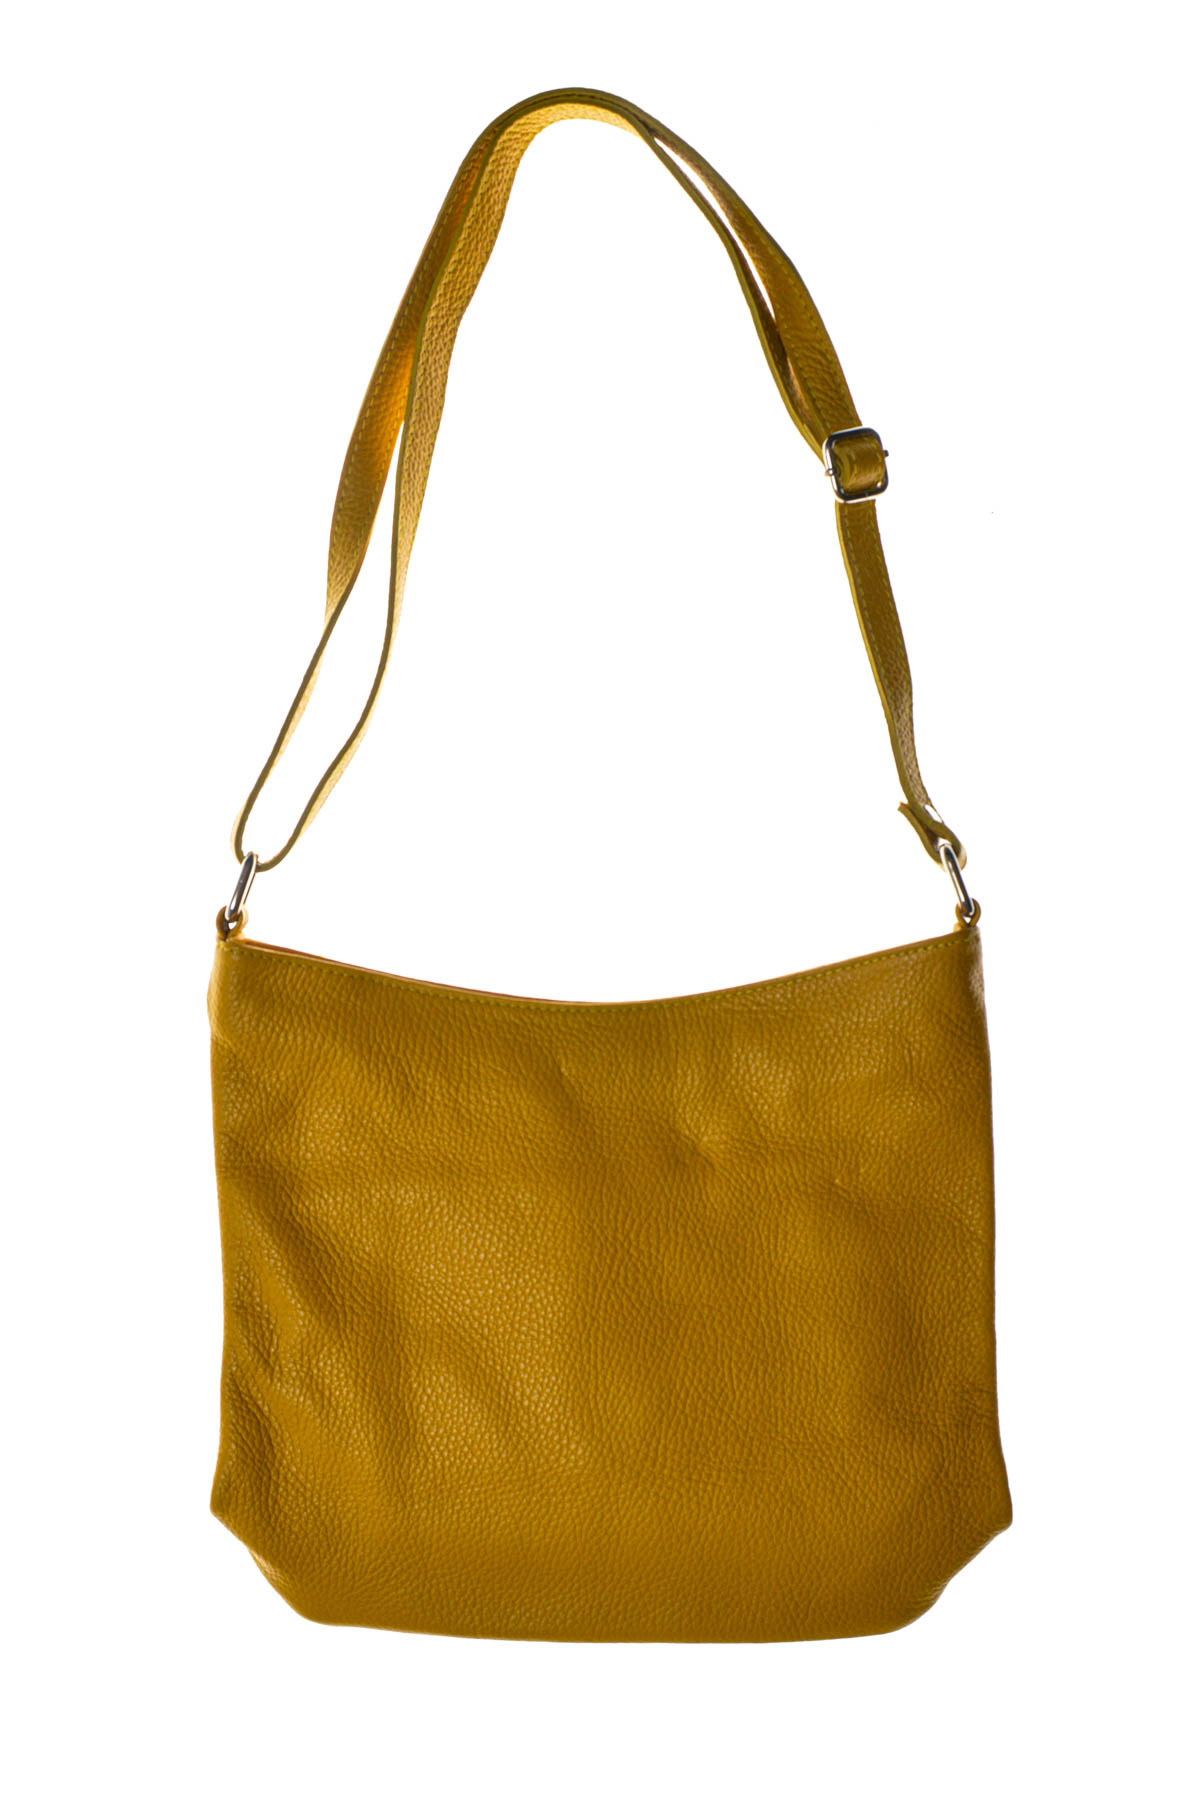 Women's bag - Made in Italy - 0